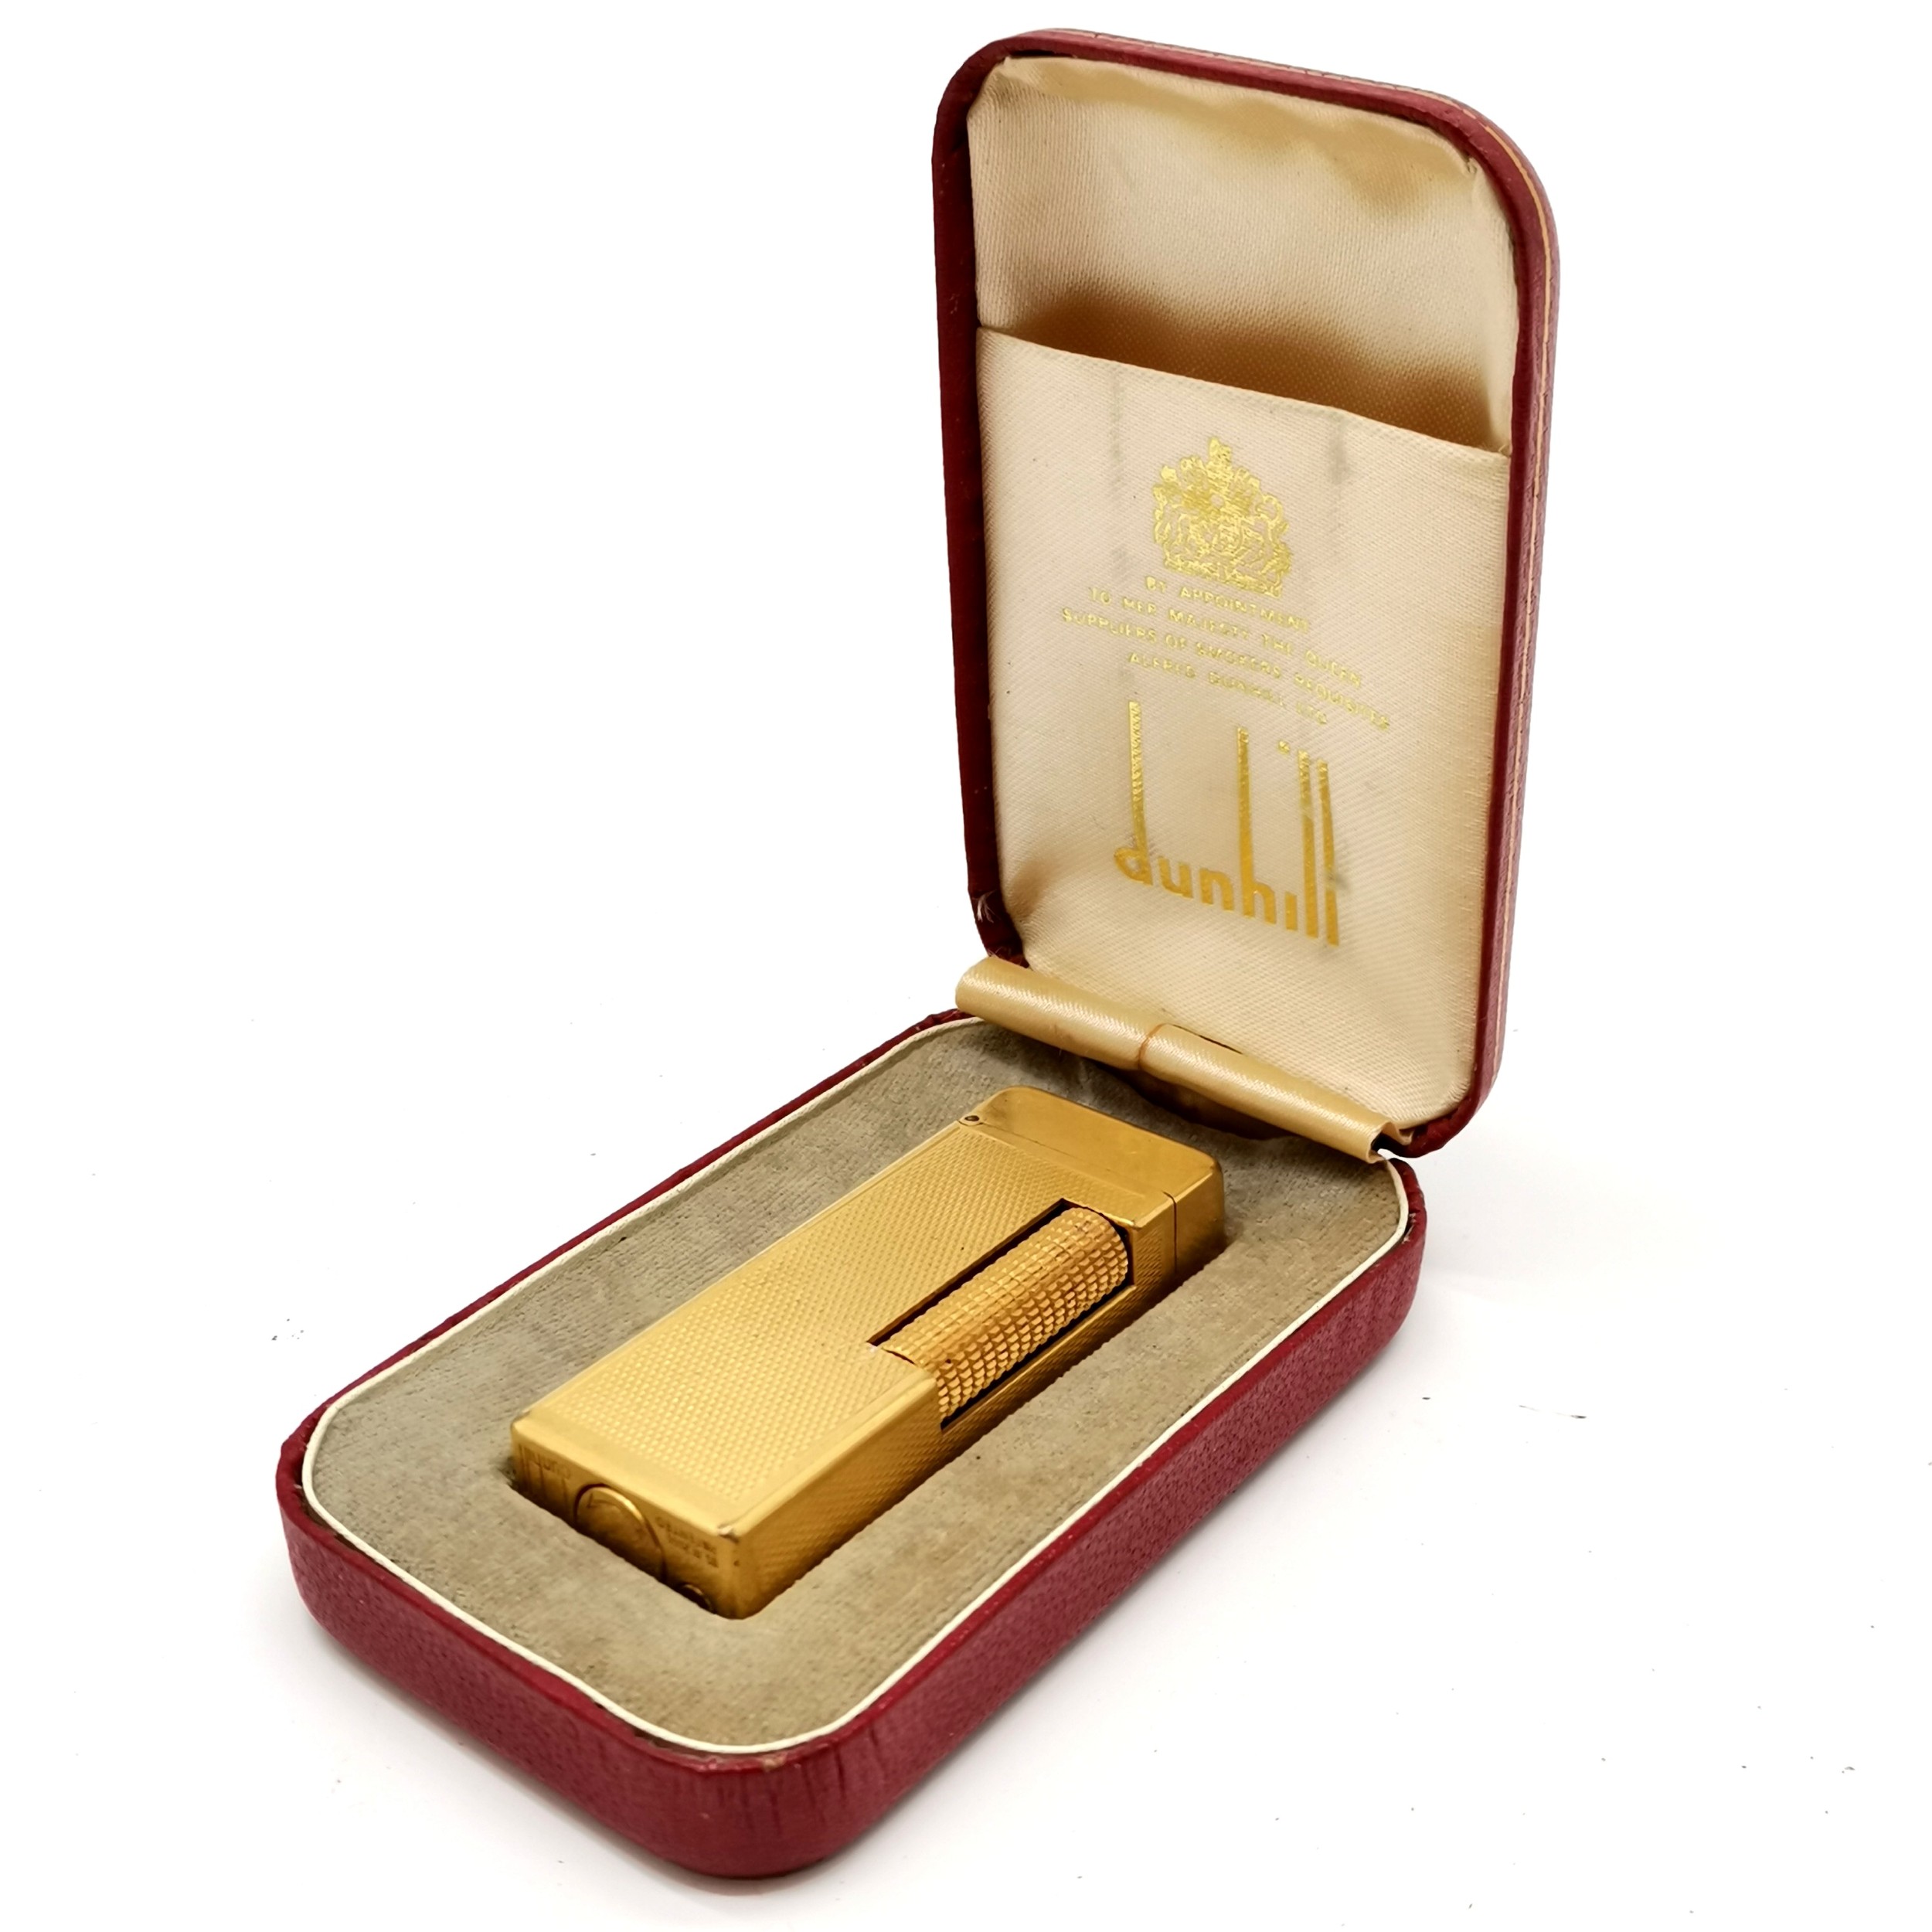 Dunhill Rollagas lighter (in original box with instructions) t/w Dupont silver plated lighter - Image 3 of 3